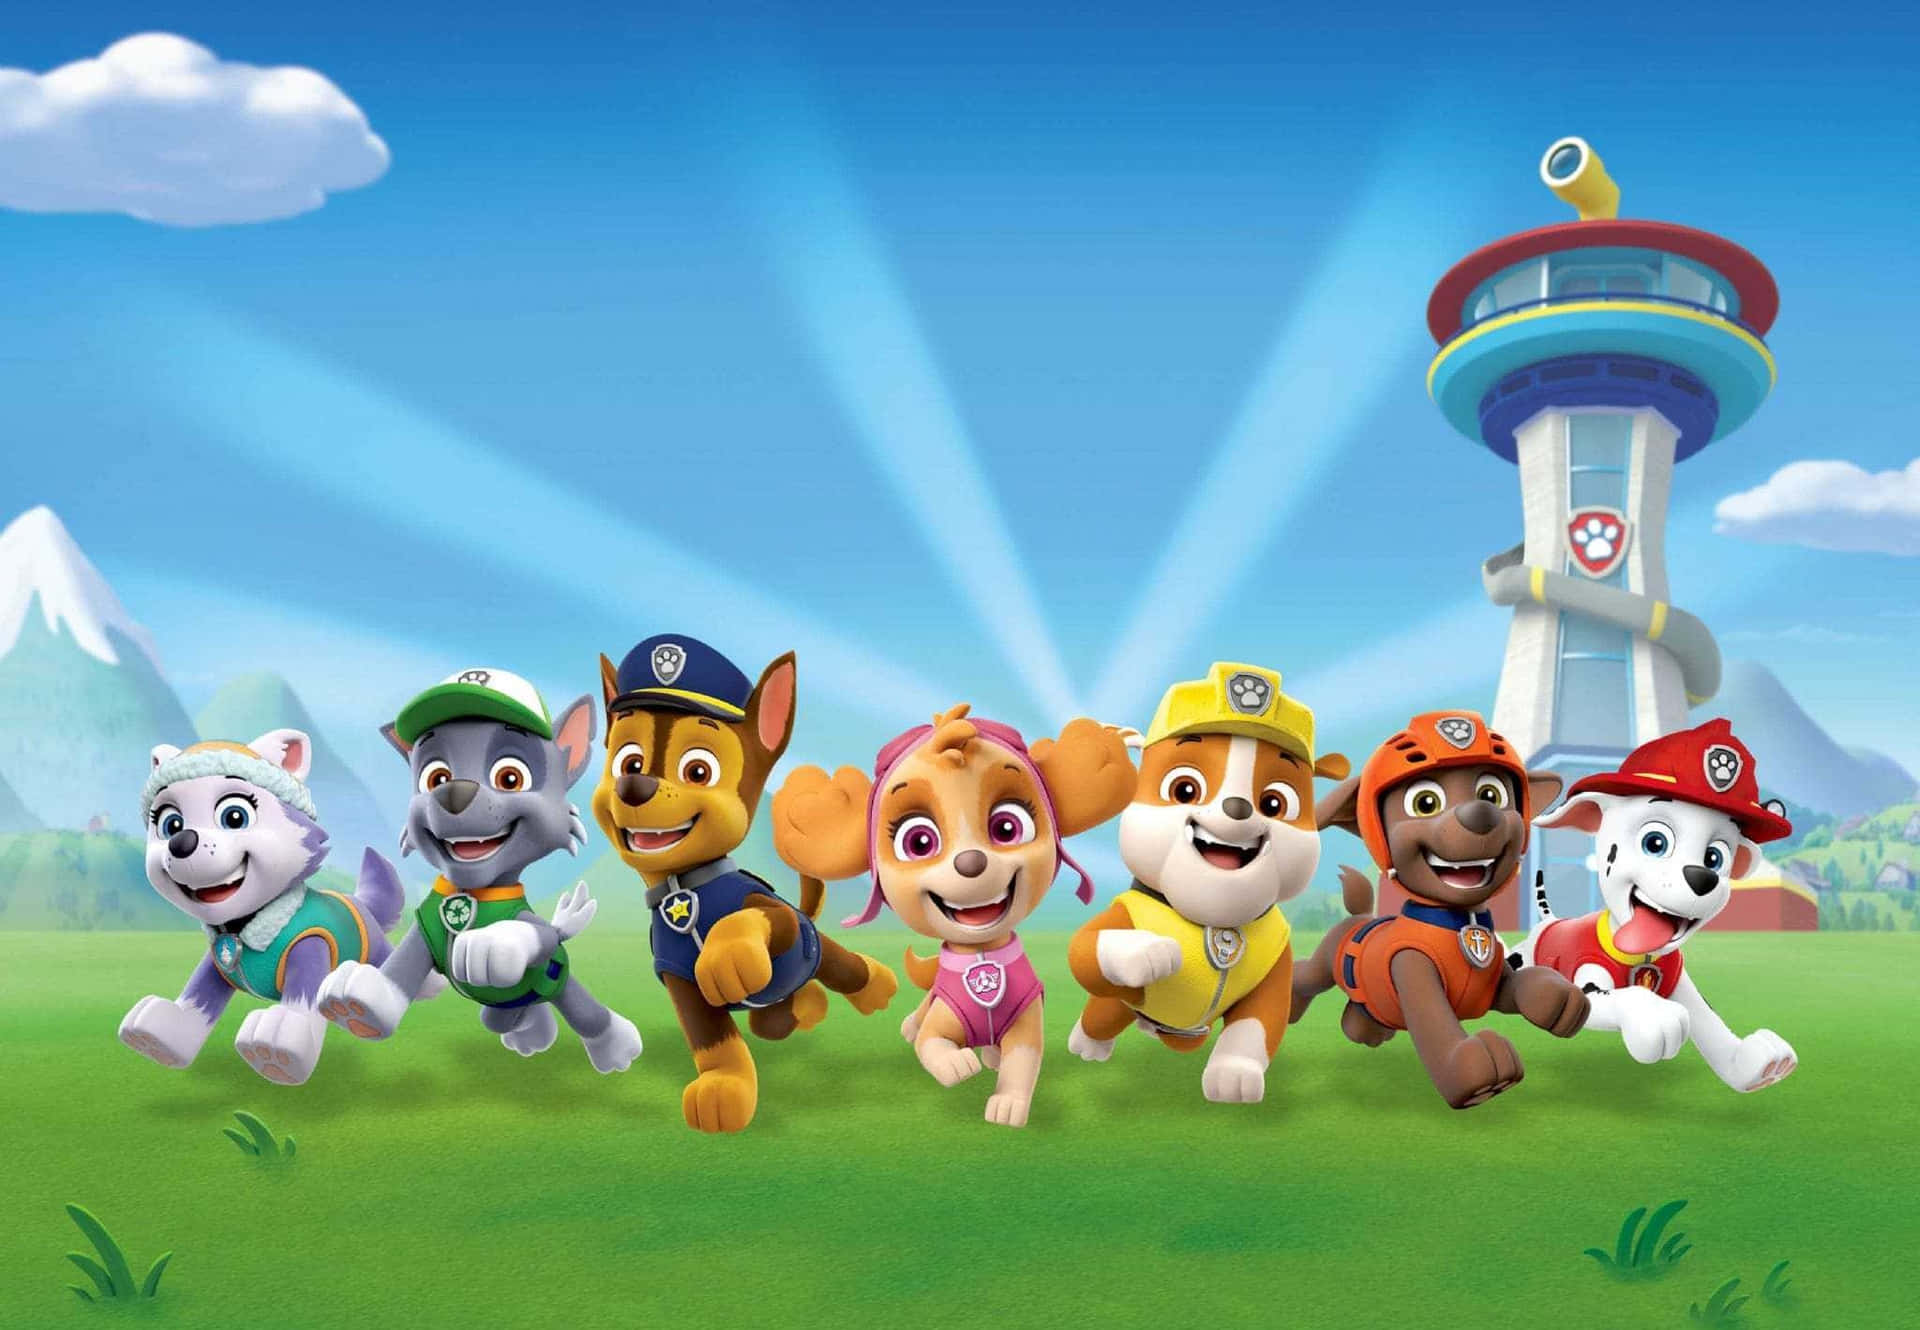 PAW Patrol on Twitter New wallpaper drop  You can find all our  wallpapers on our Instagram highlight httpstco2IyPw2ERQl  Twitter